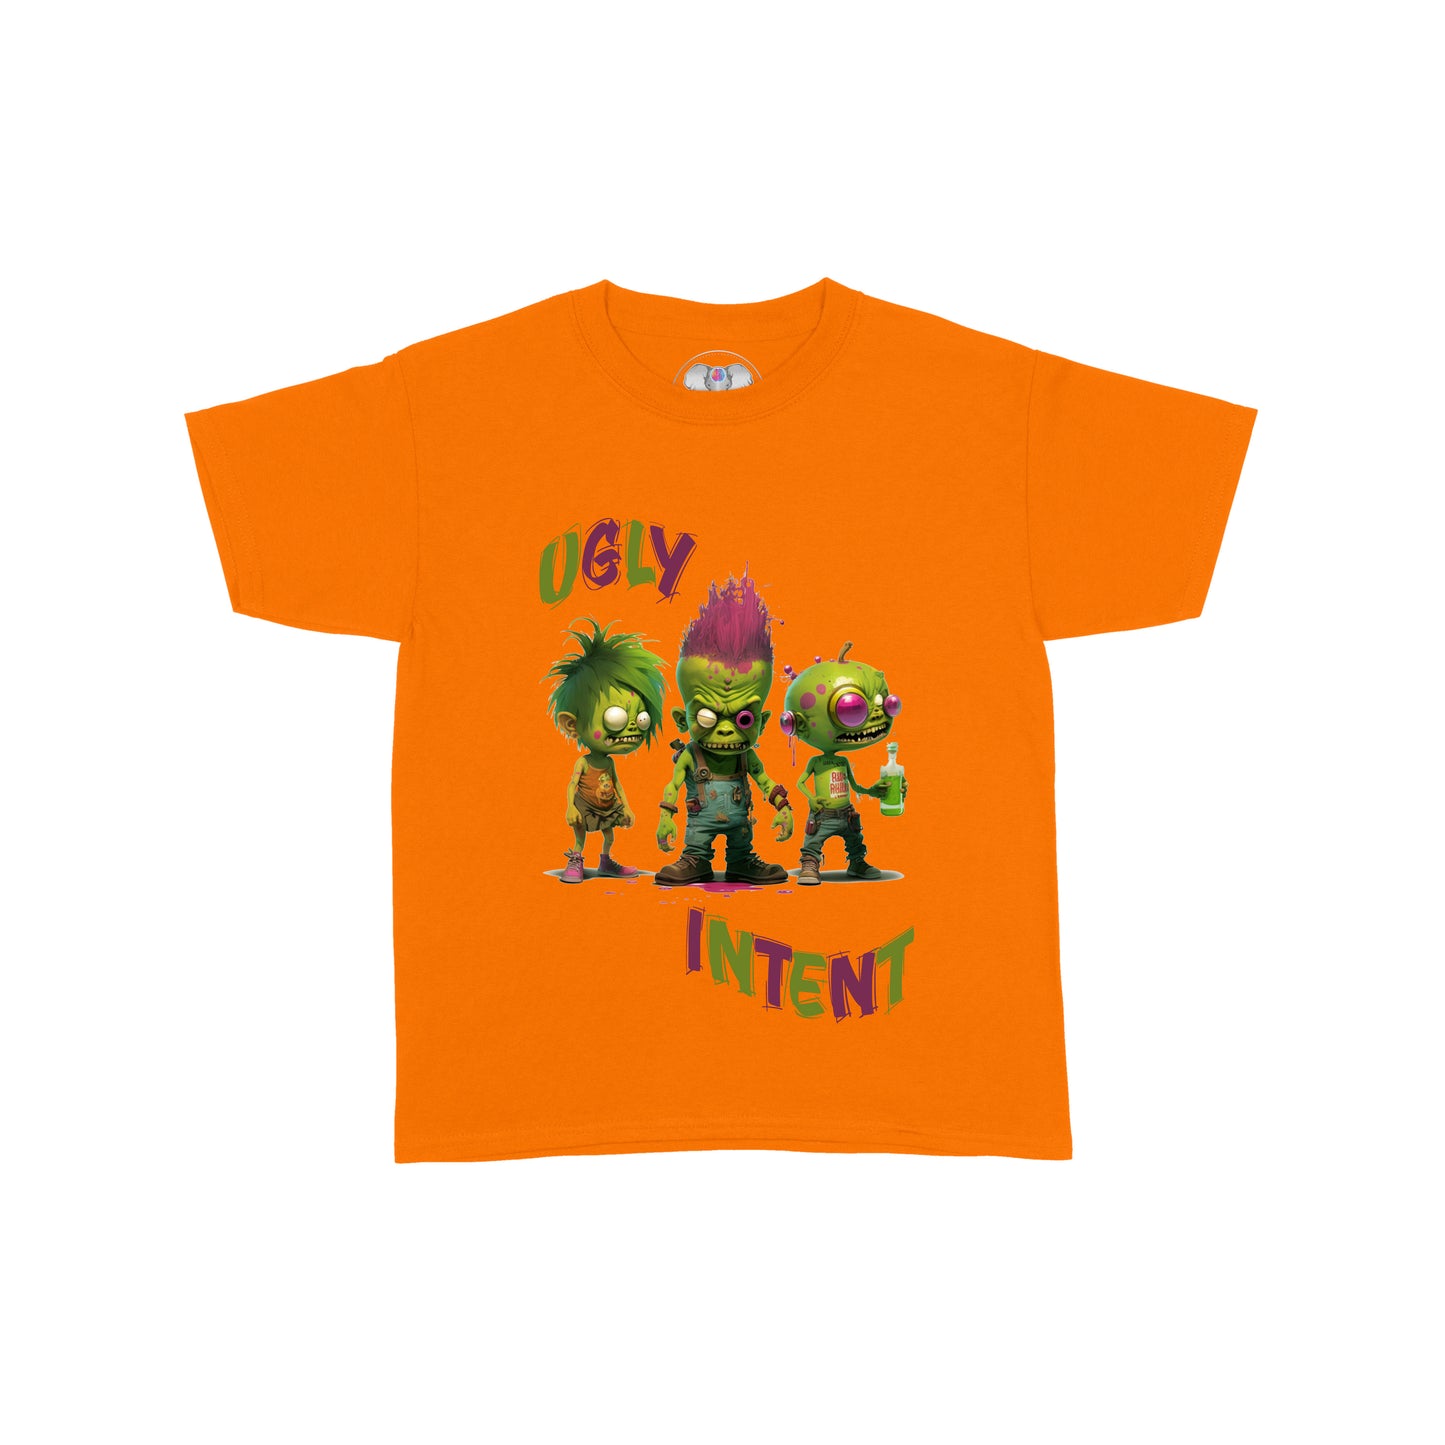 Ugly Intent Graphic T-shirt Youth